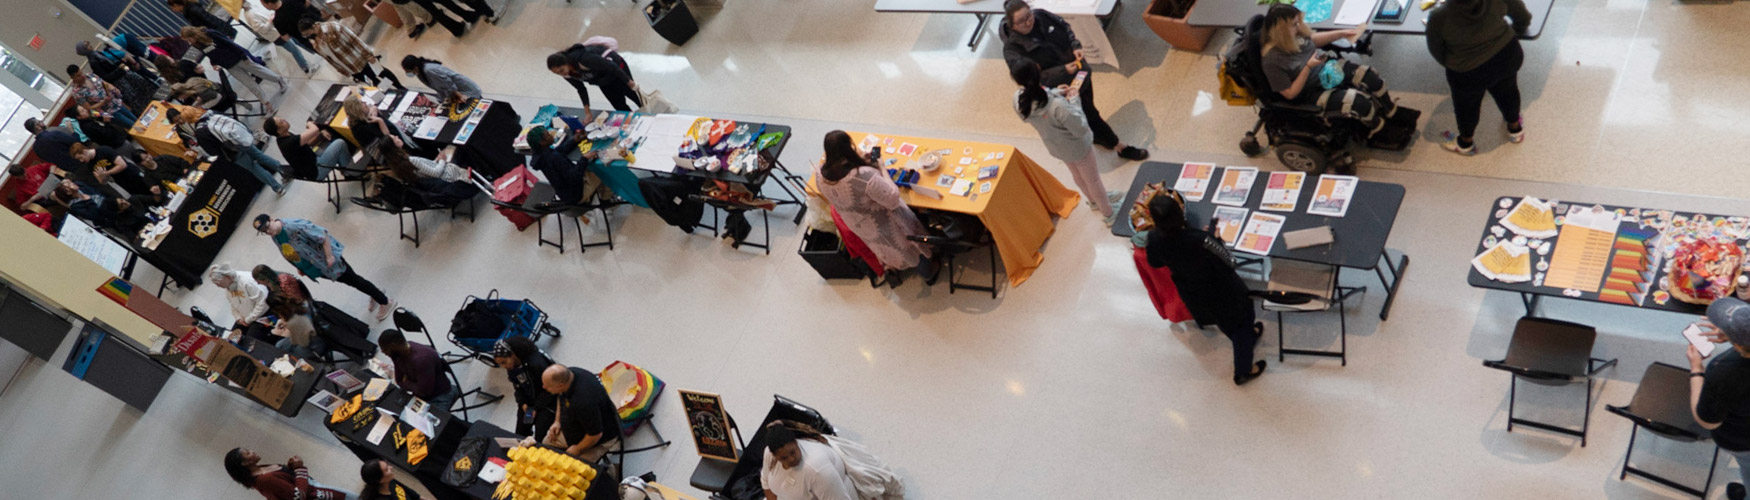 Overhead view of tabling event